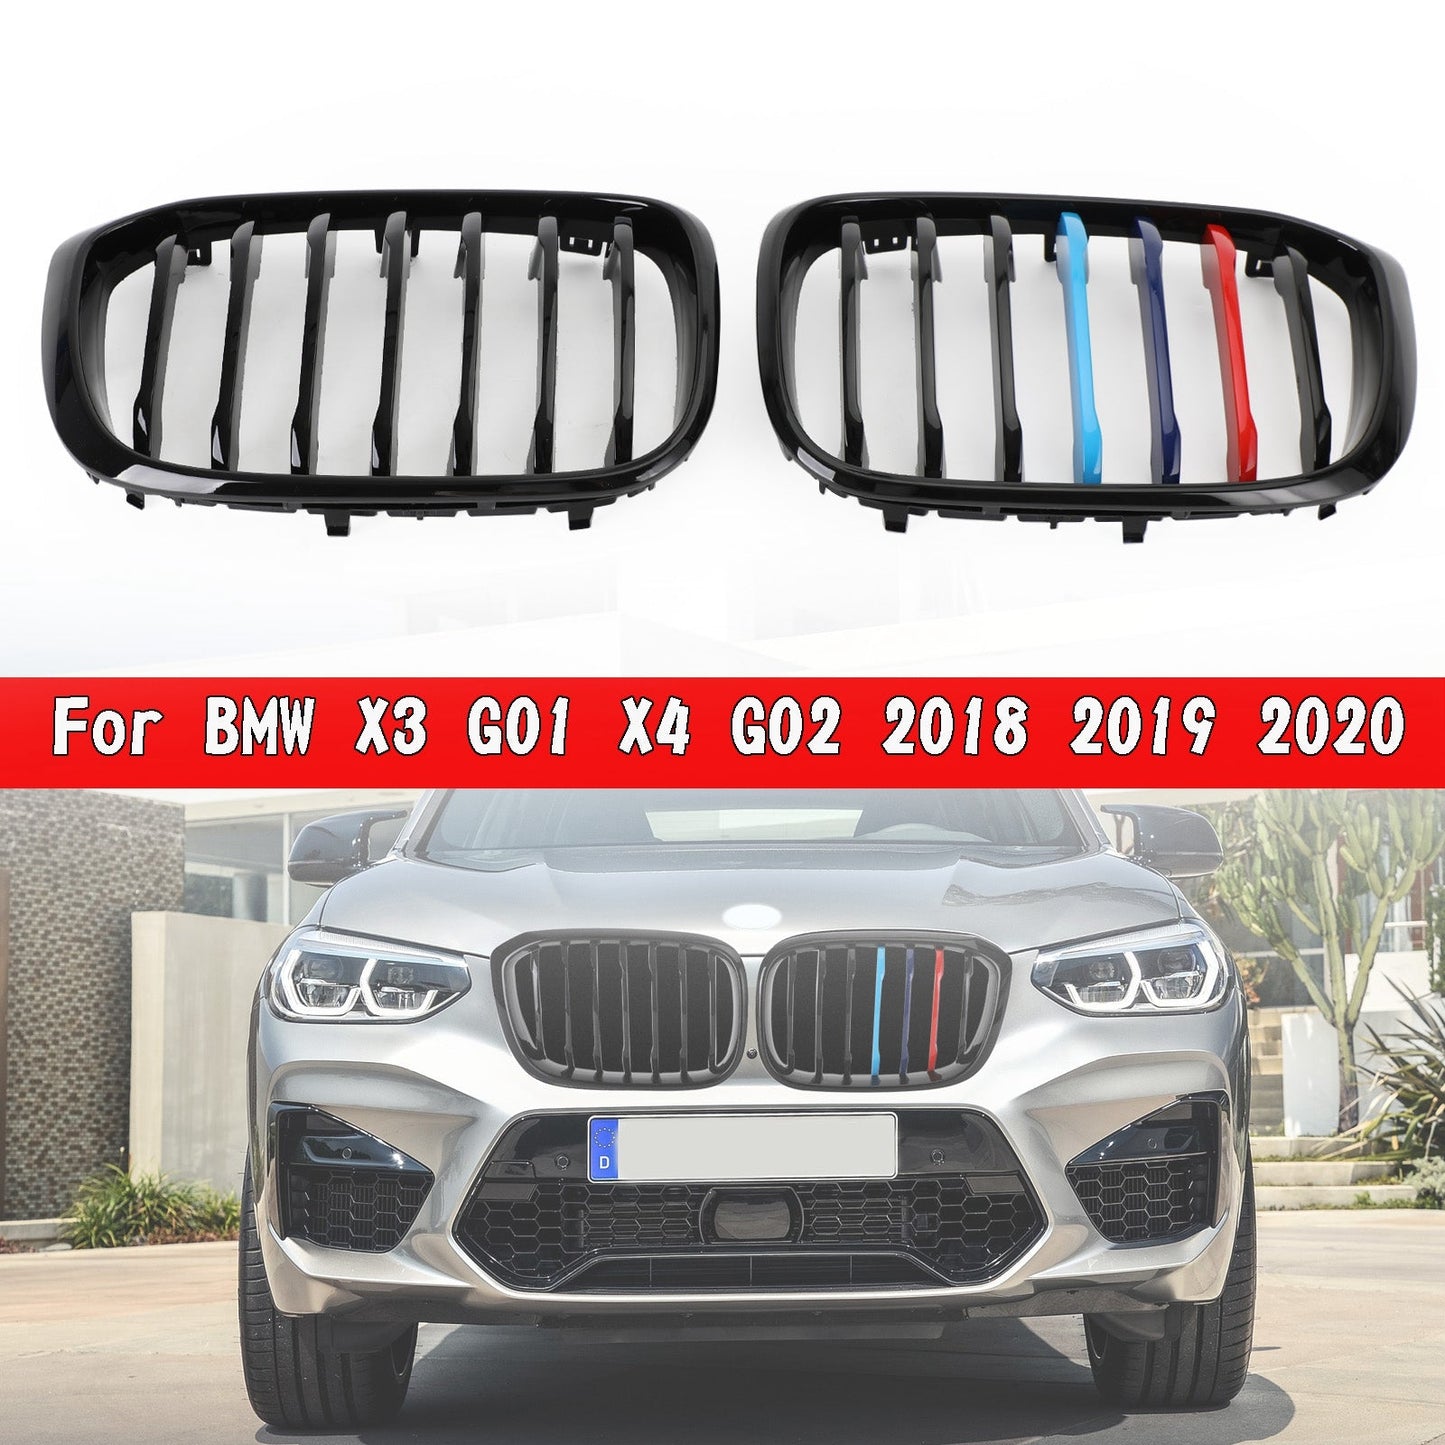 Pair M-Color Kidney Grill Grille 51138469959 fit BMW G01 X3 G02 X4 Gloss Black